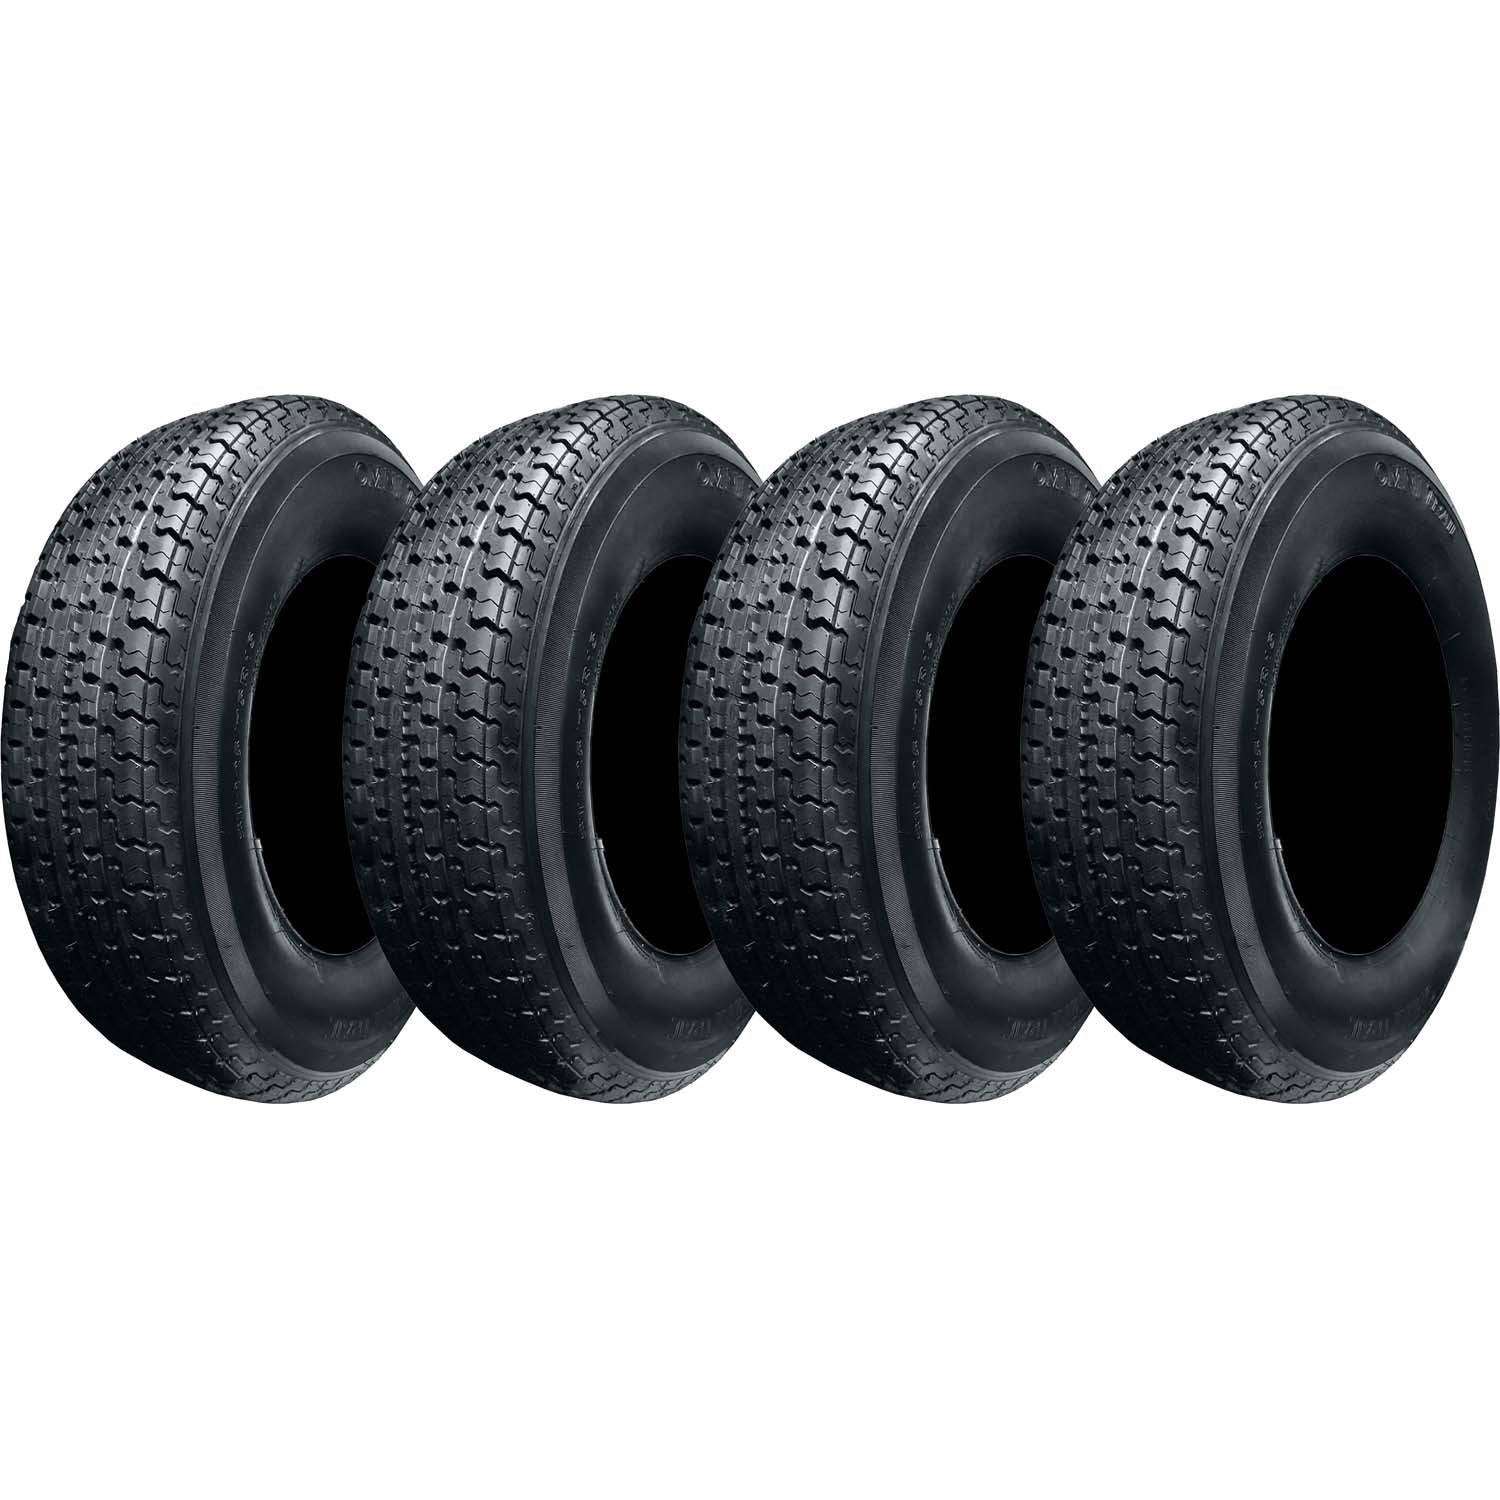 Omni Trail Radial Trailer Tire LRD 8ply ST205/75R15 - Pack of 4